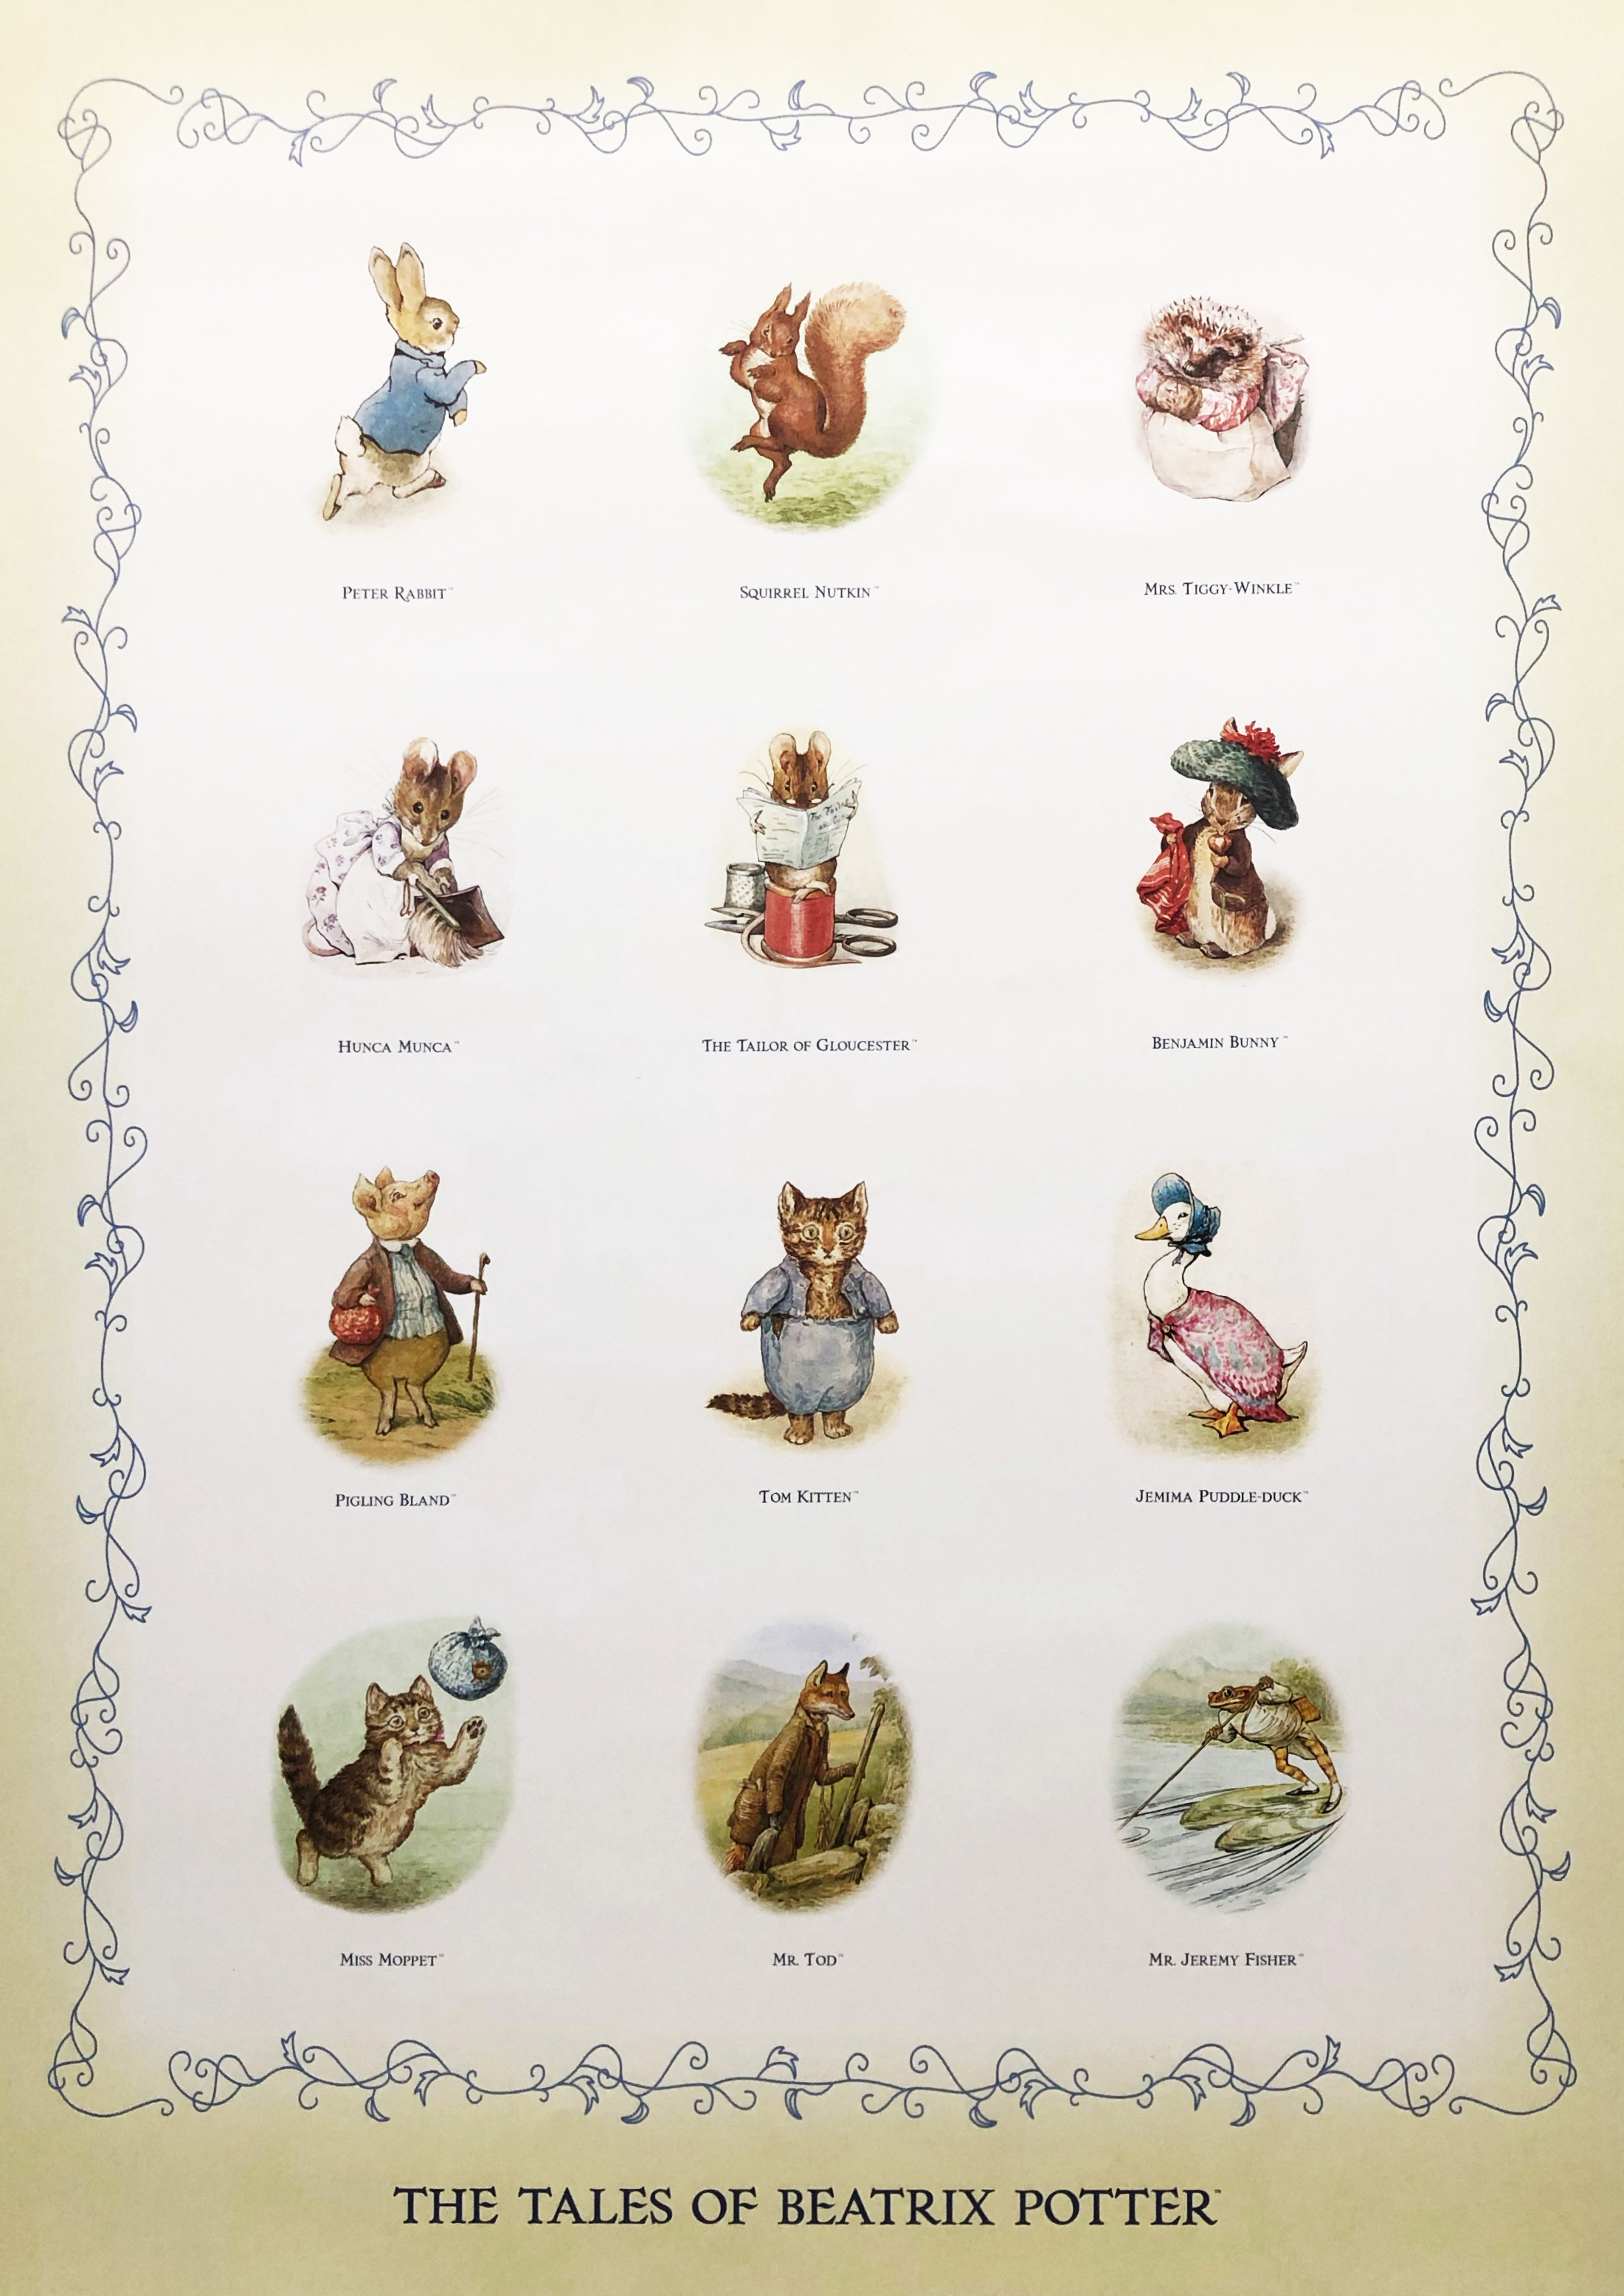 The Characters of Beatrix Potter